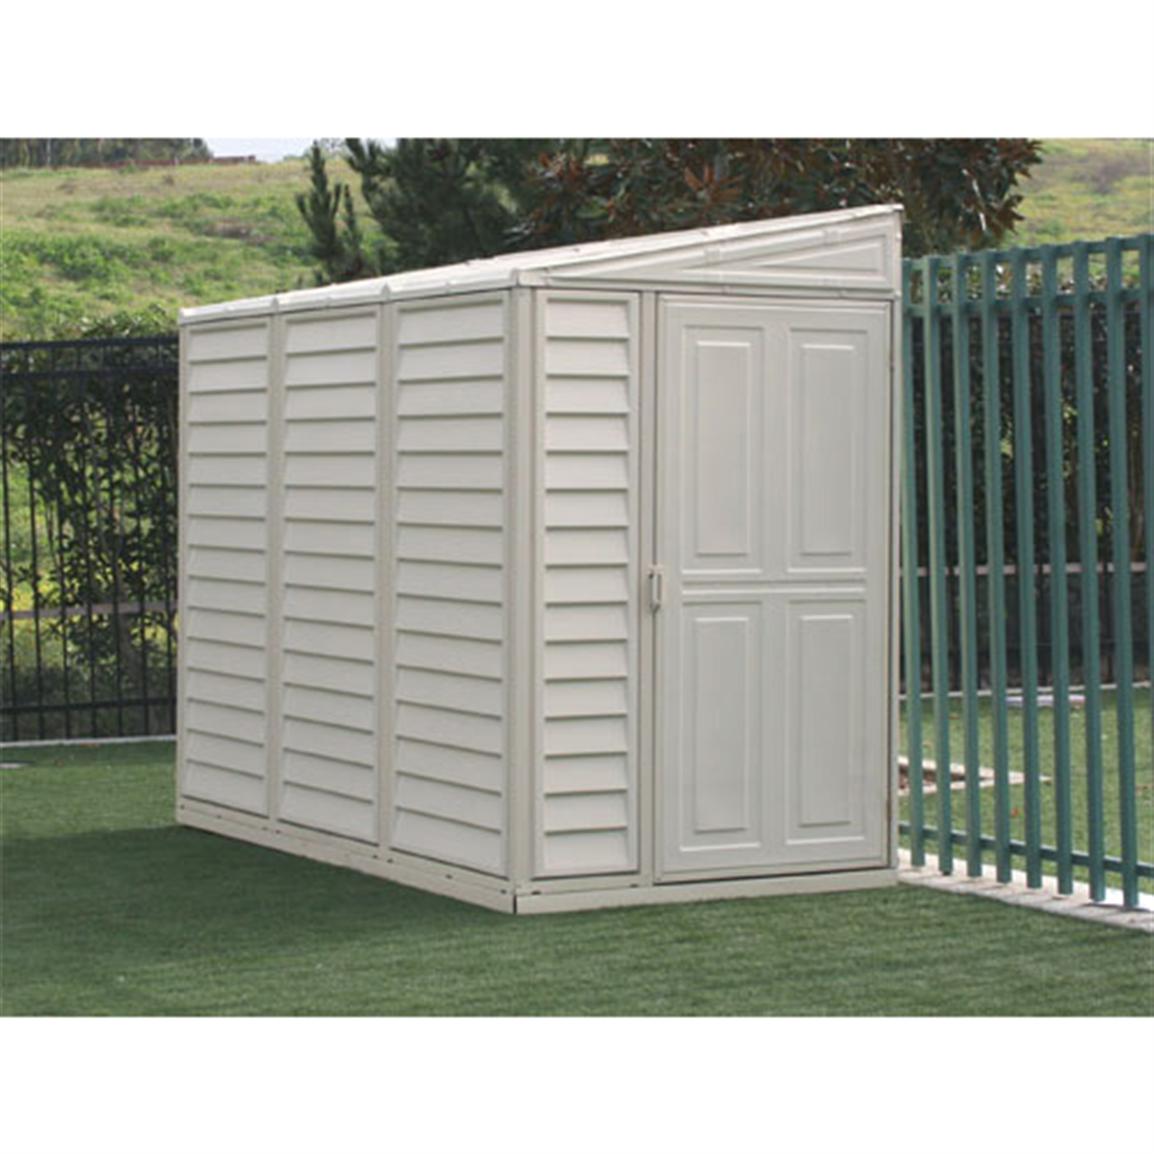 duramax® 4x8' sidemate vinyl shed with foundation - 130900